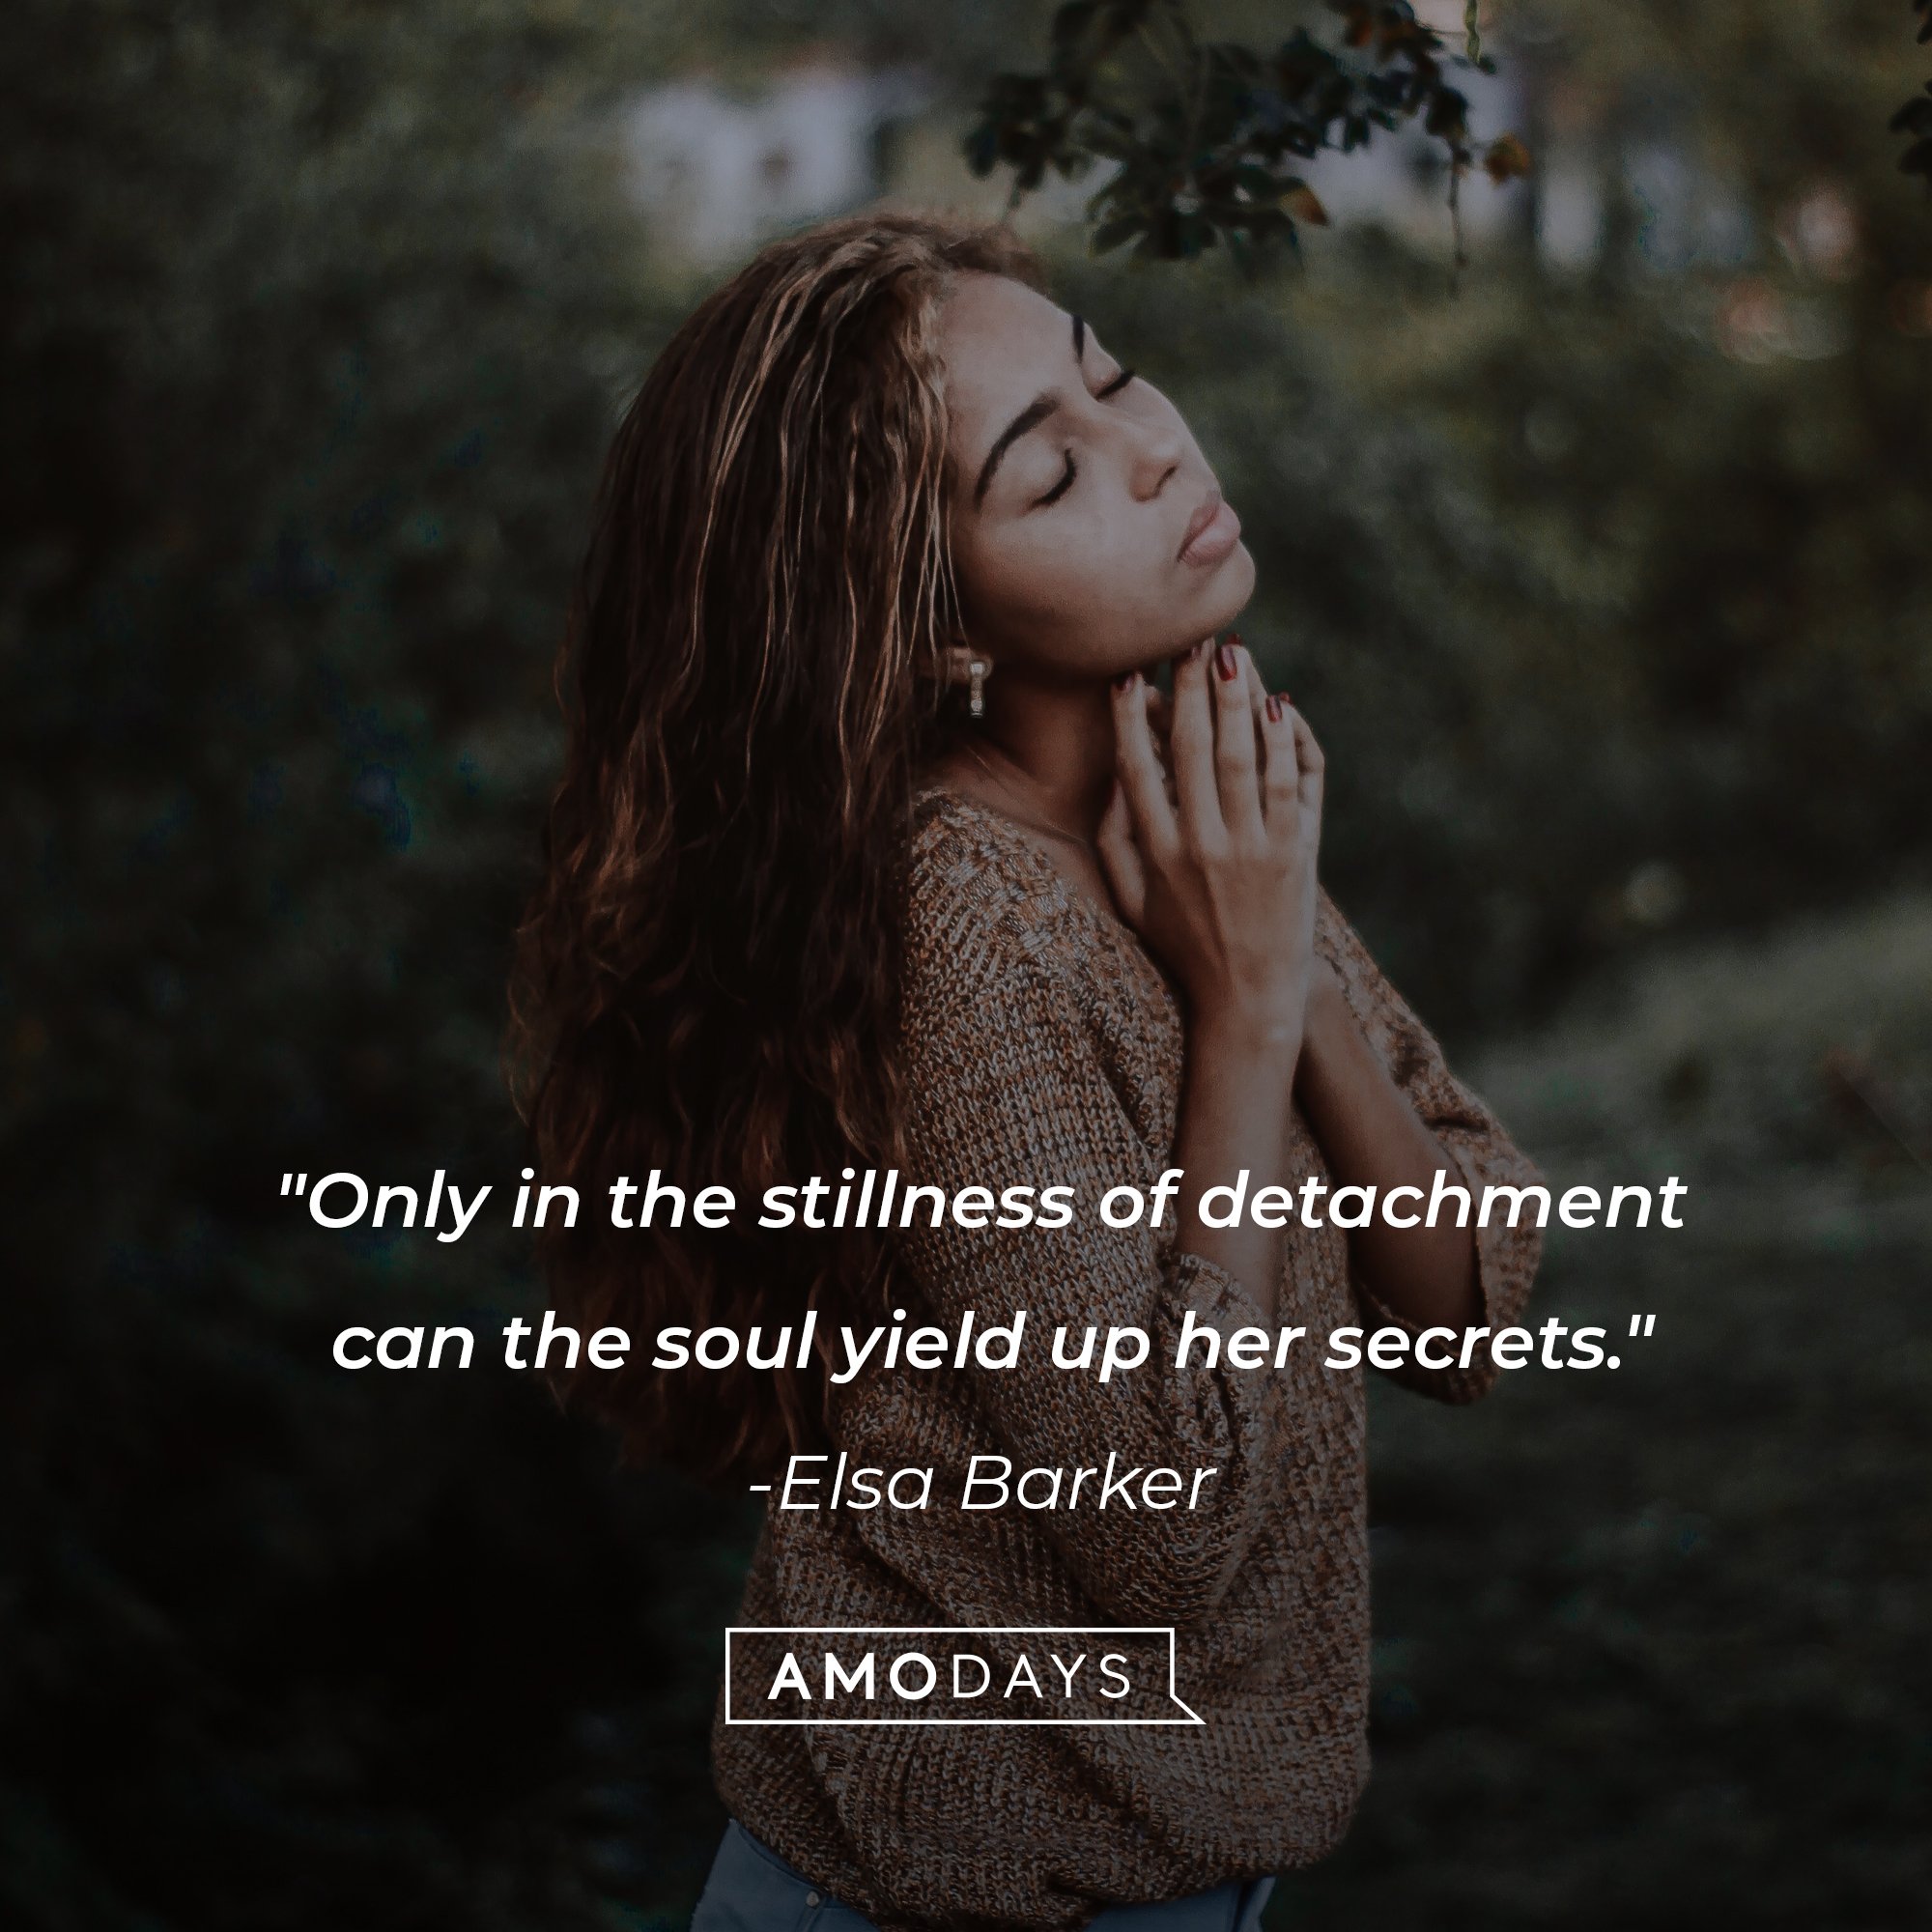 Elsa Barker's quote: "Only in the stillness of detachment can the soul yield up her secrets." | Image: AmoDays